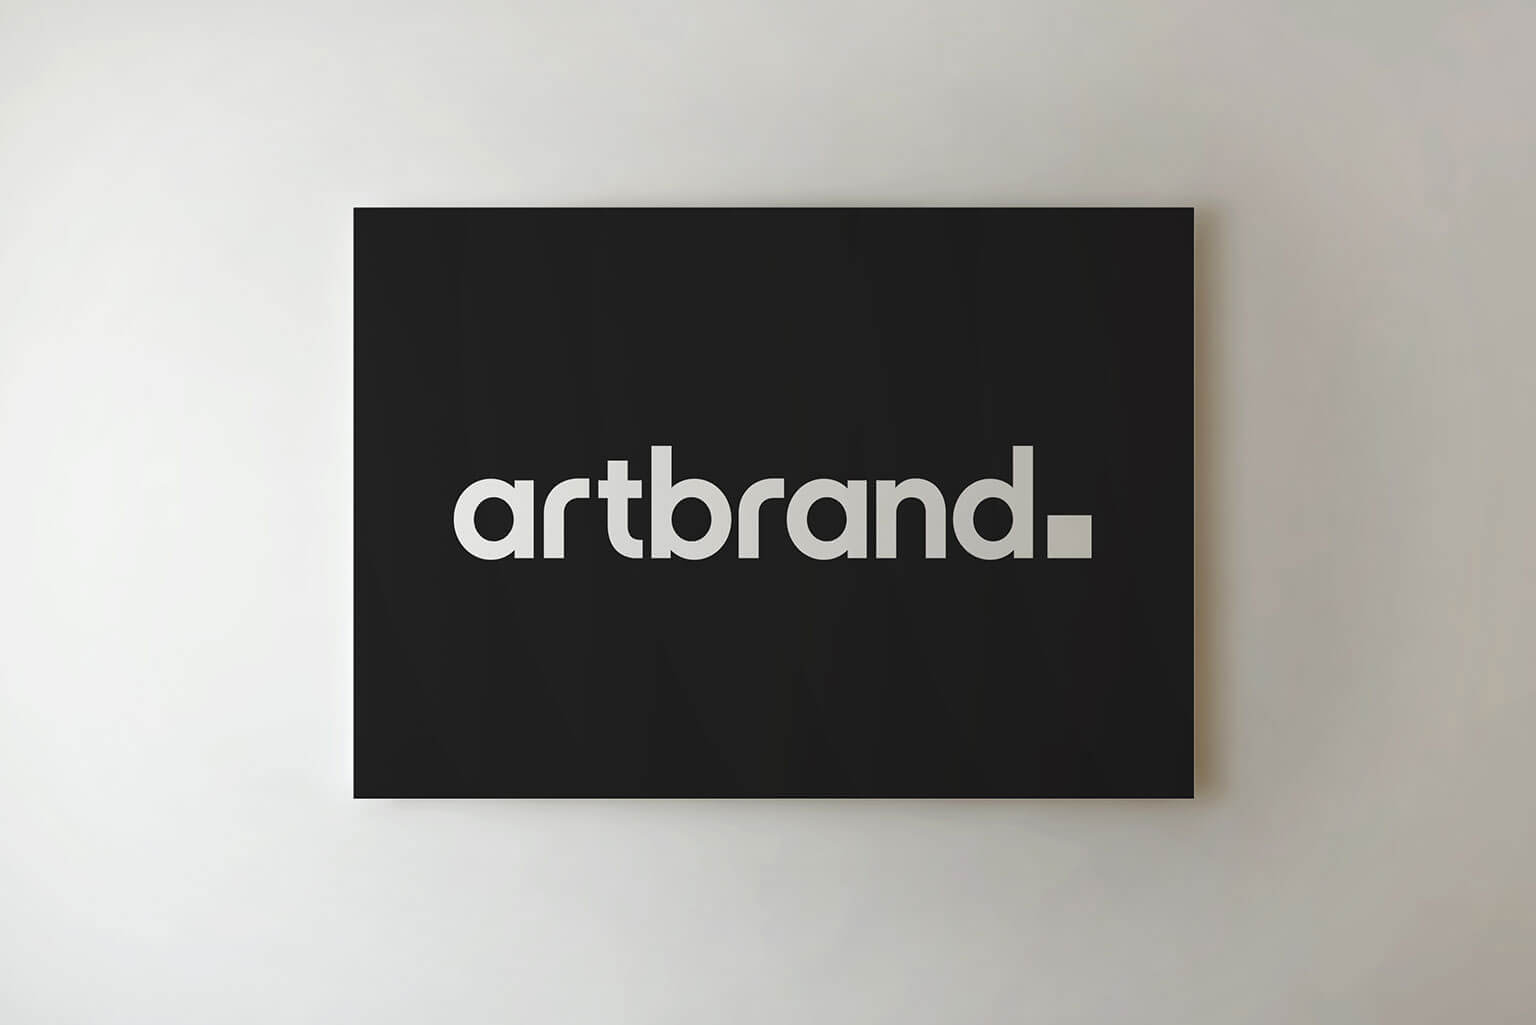 Artbrand, graphic identity, logo, stationery, poster ad for an art gallery